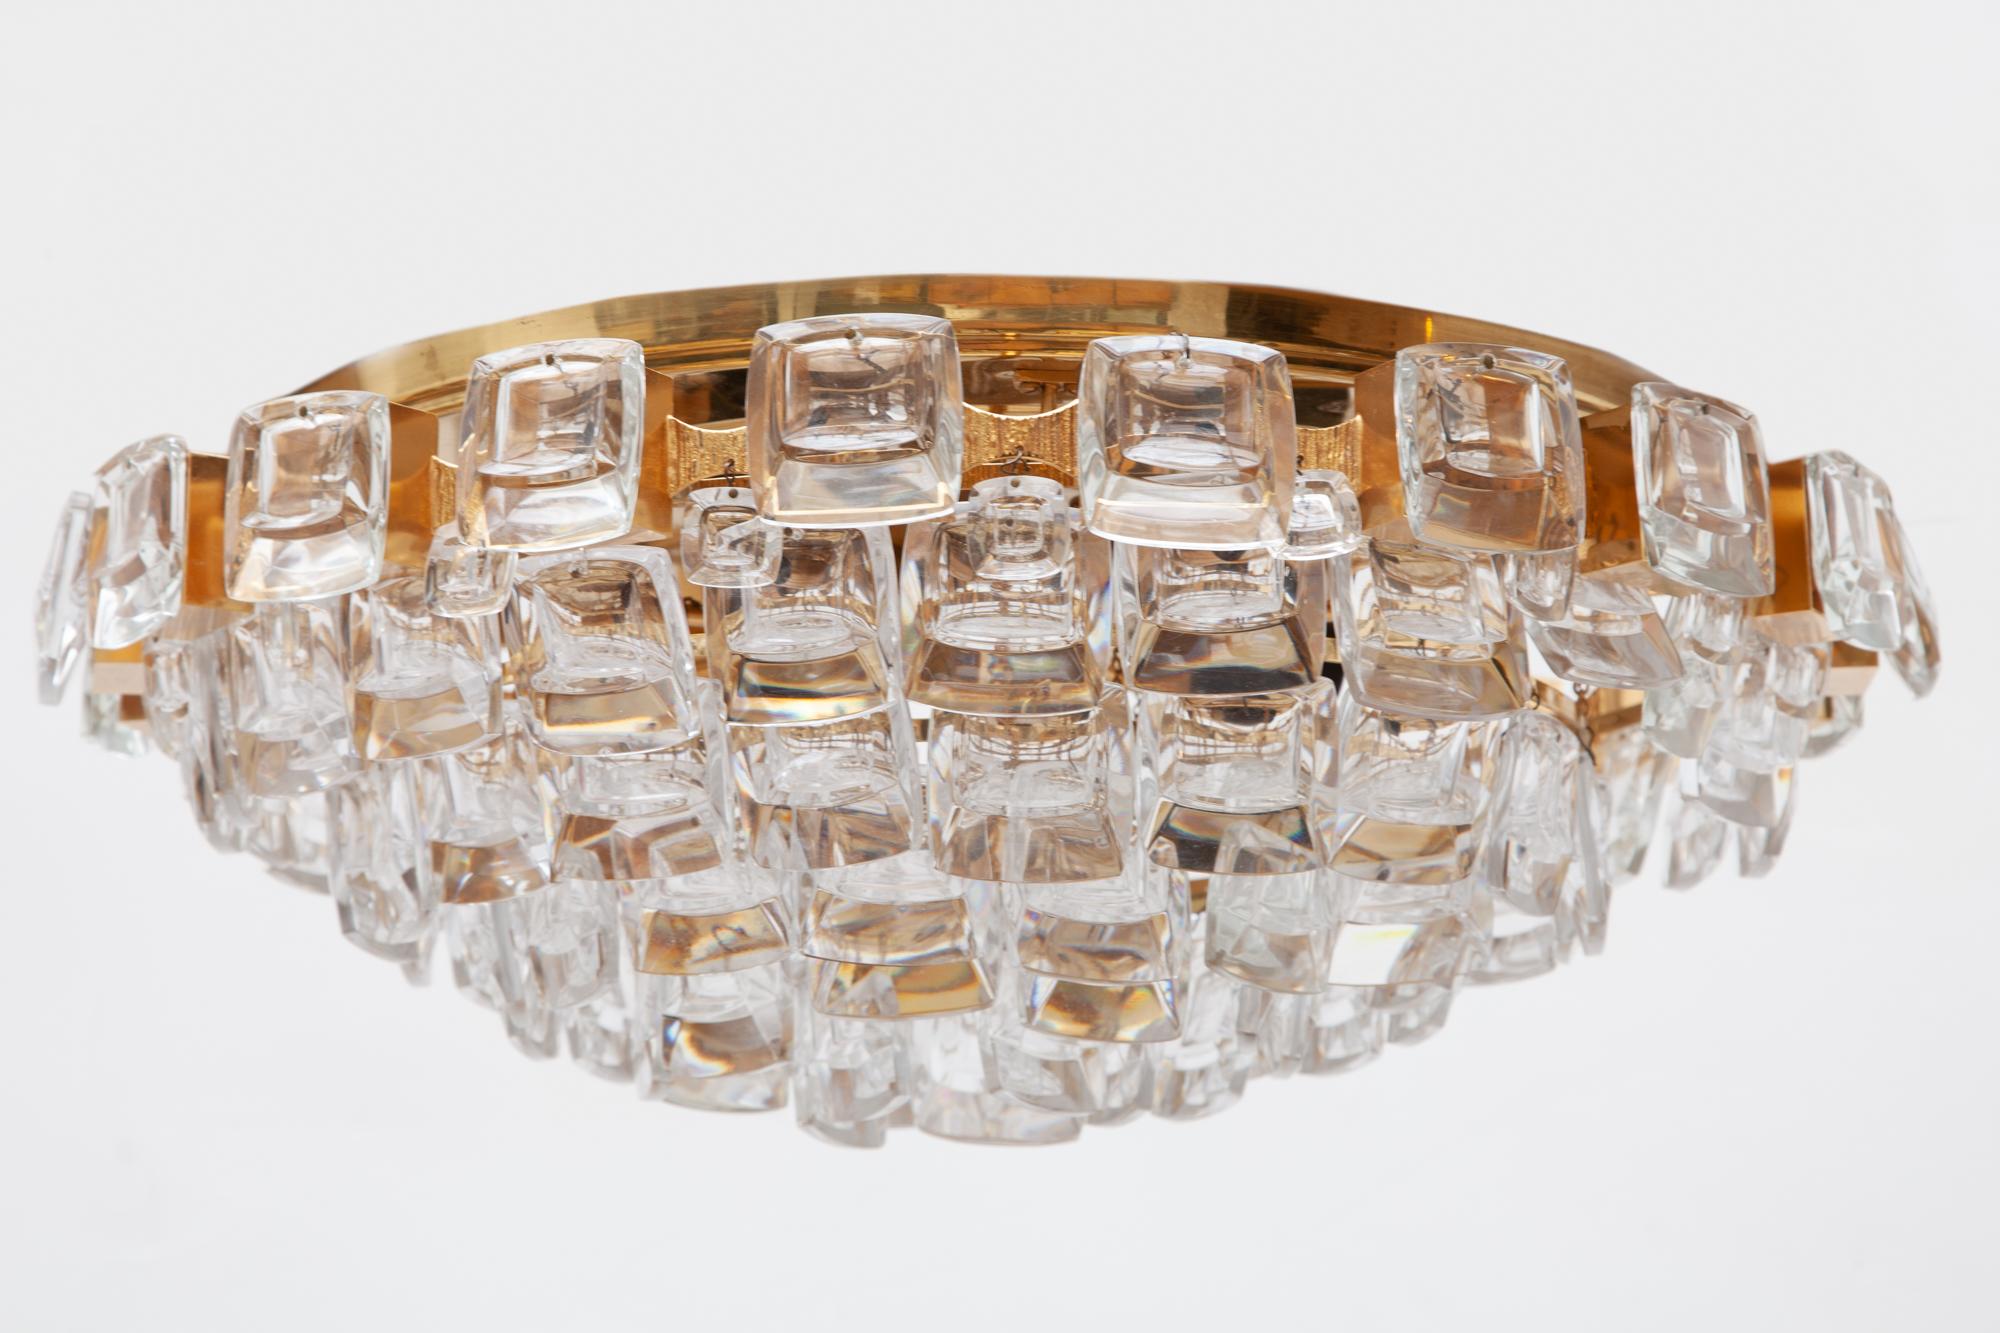 Vintage chandelier by Palme and Walter, Palwa, Germany, 1970s.
A beautiful Hollywood Regency flush mount made of gold-plated brass and square lens glasses. 

Five tiers of soft square glass crystals. Lit by 5 bulbs.Dimensions 48 W x 15 H x 48 D cm 